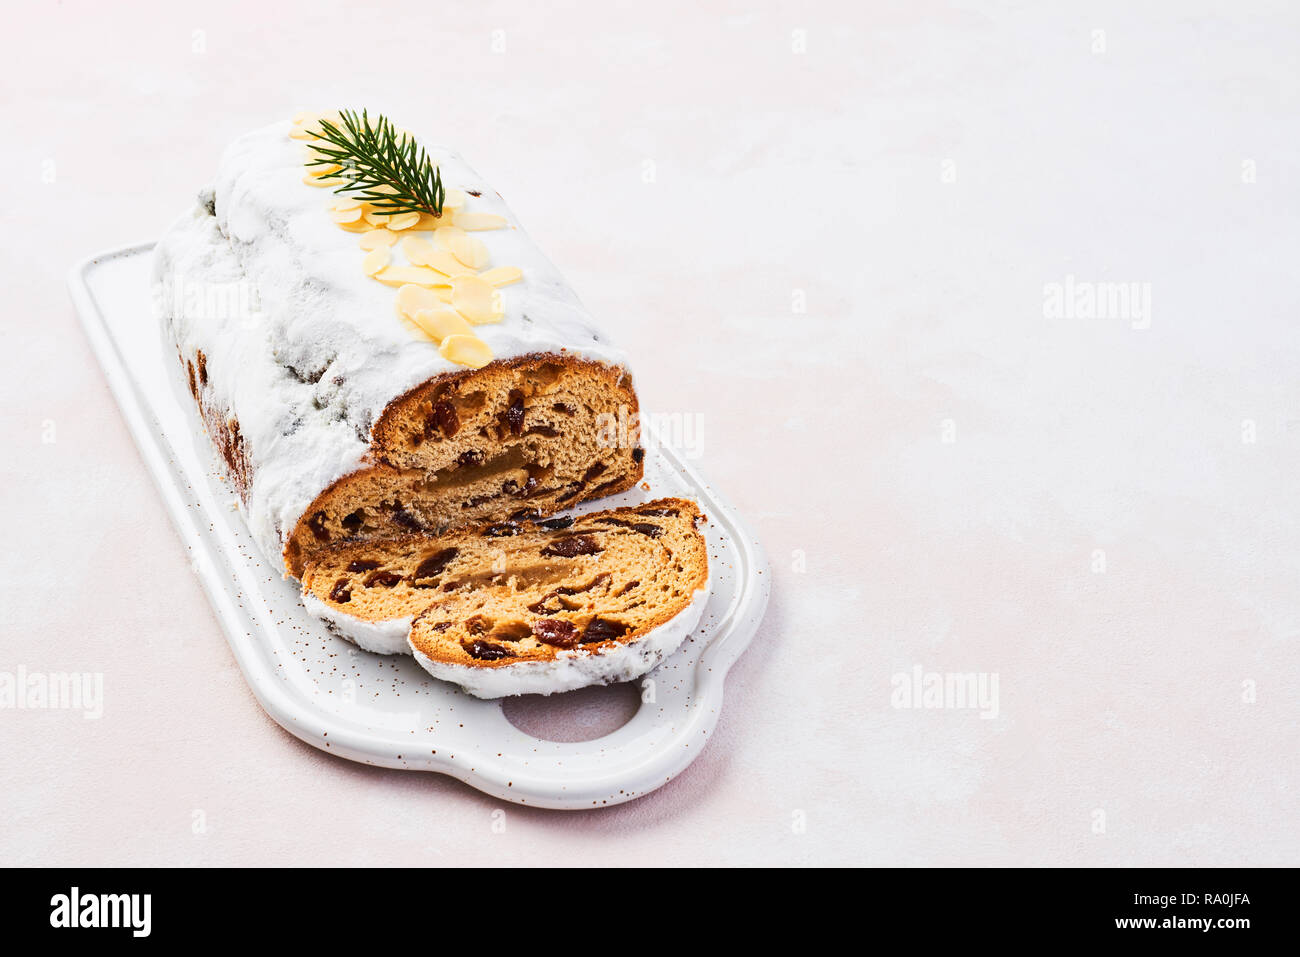 Christmas Stollen cake with icing sugar, marzipan, almonds and raisins on white serving plate. Traditional Dresdner christ pastry. Rose background wit Stock Photo